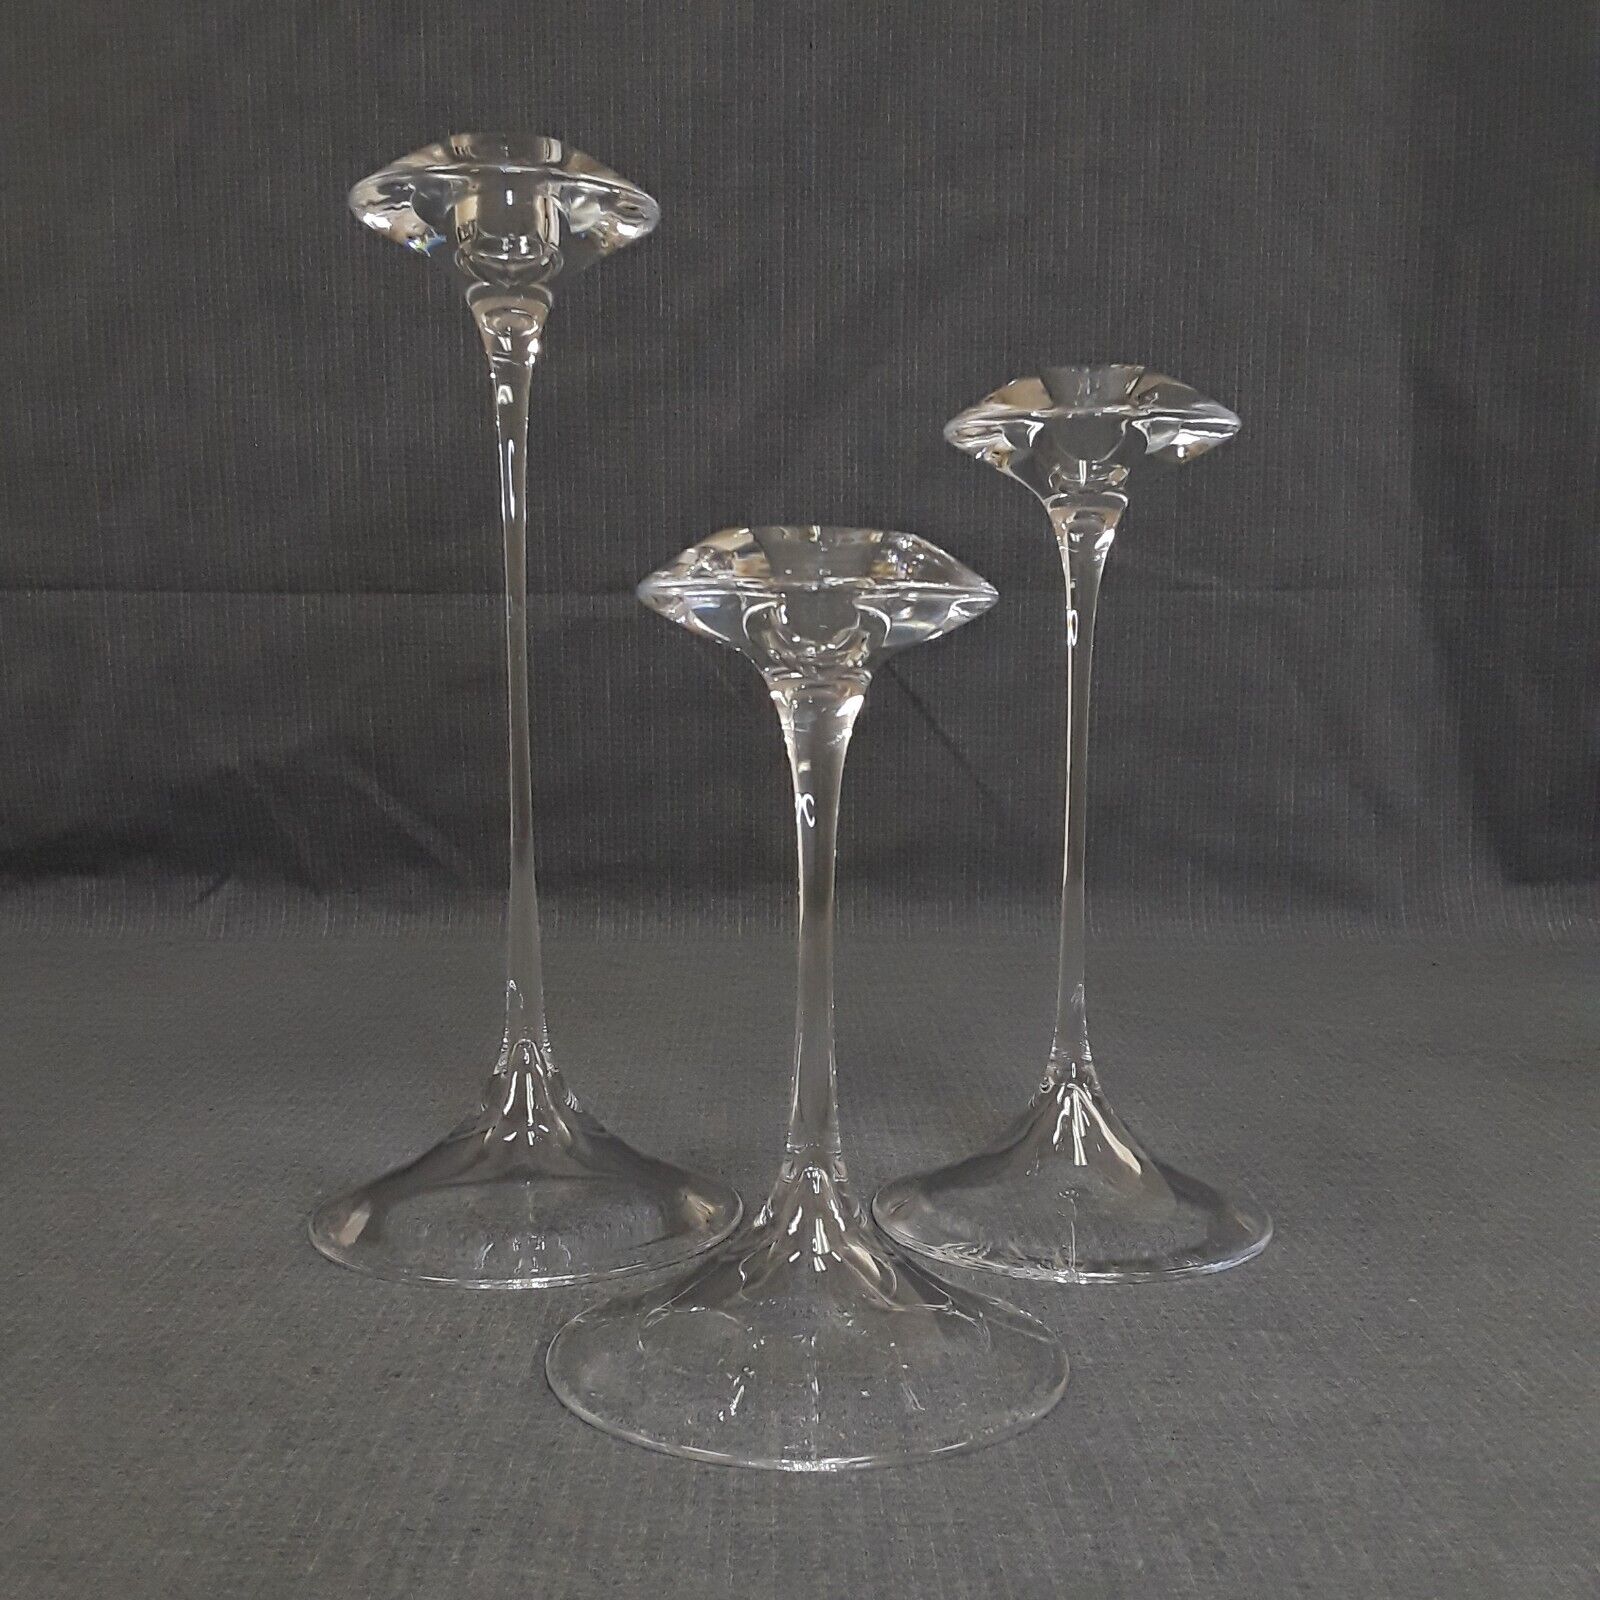 Kosta Boda FANFARE Clear Crystal Candle Holders Set of 3 Swedish Contemporary